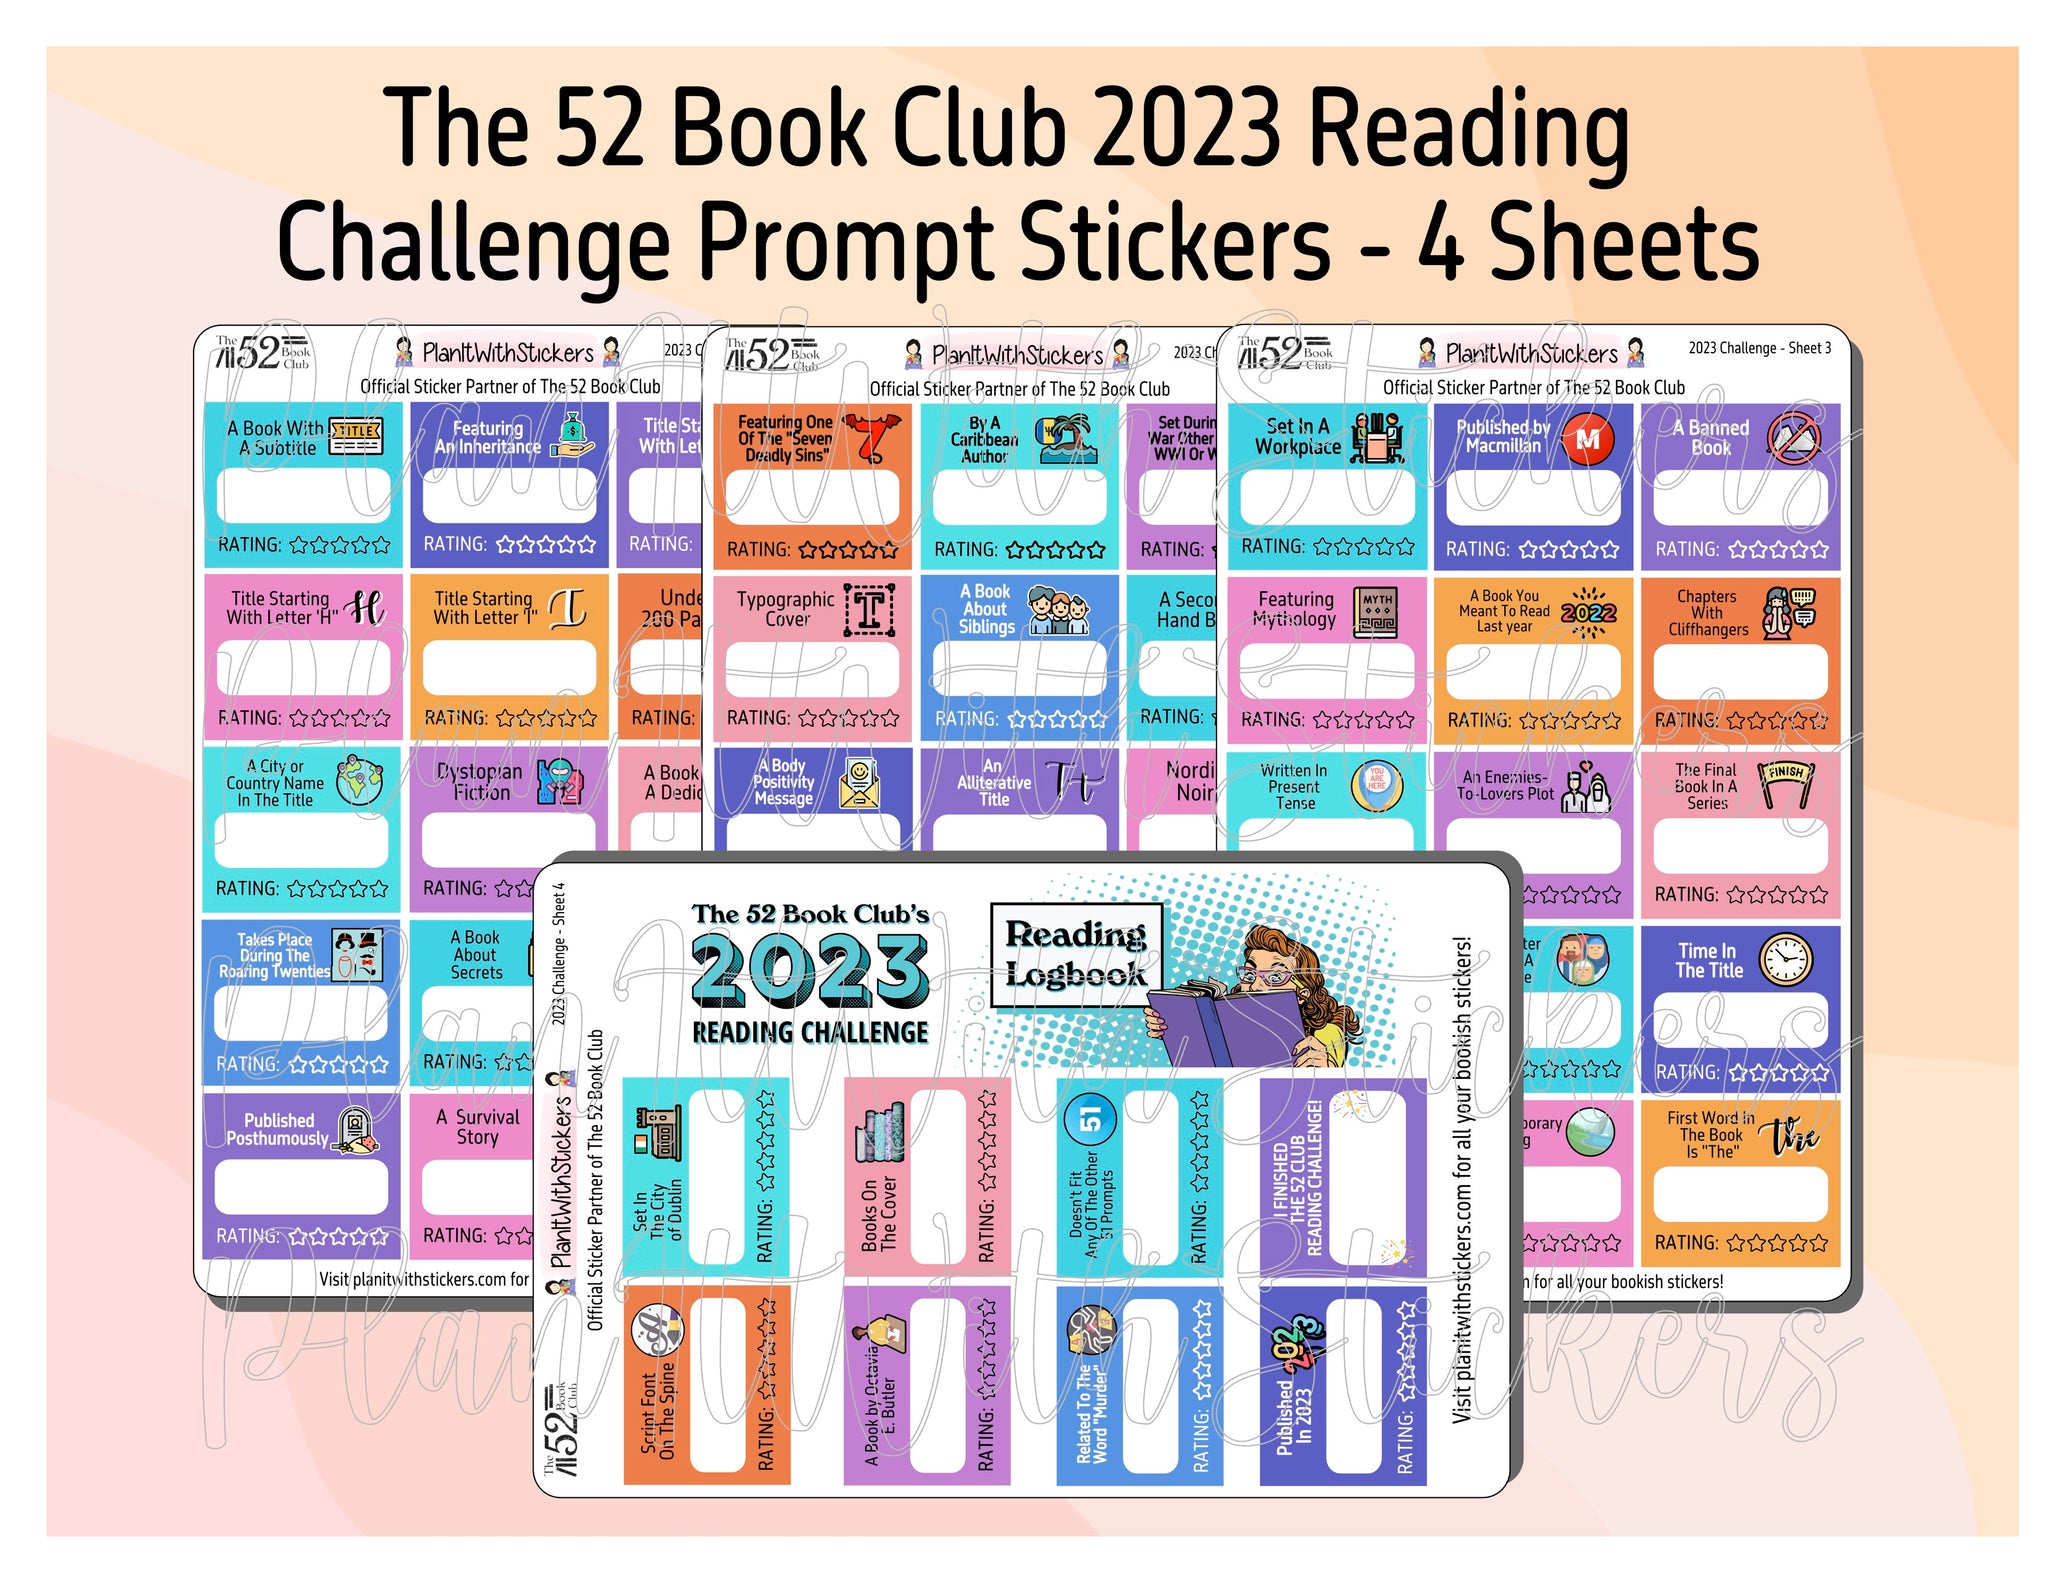 2023 - The 52 Book Club 2023 Reading Challenge Prompt Stickers for